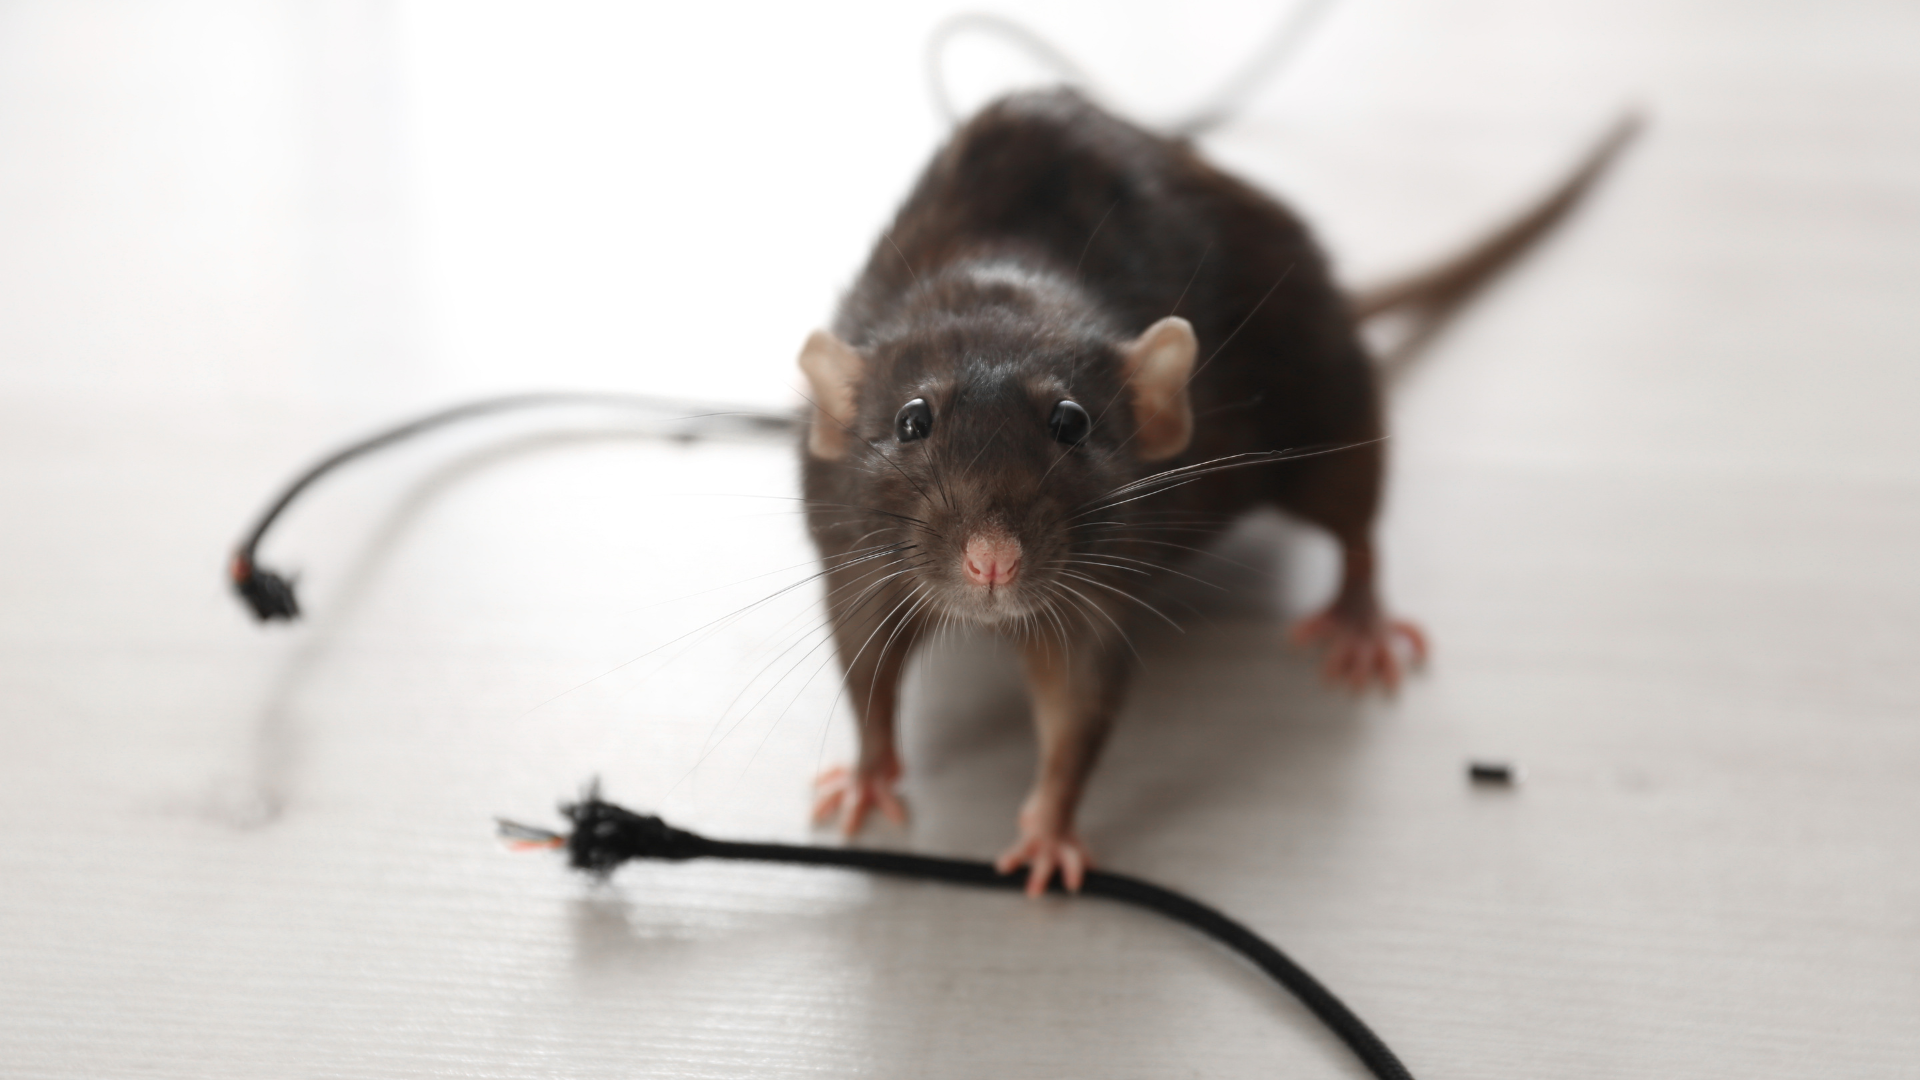 The Decluttering Tips You Need to Keep Mice Away